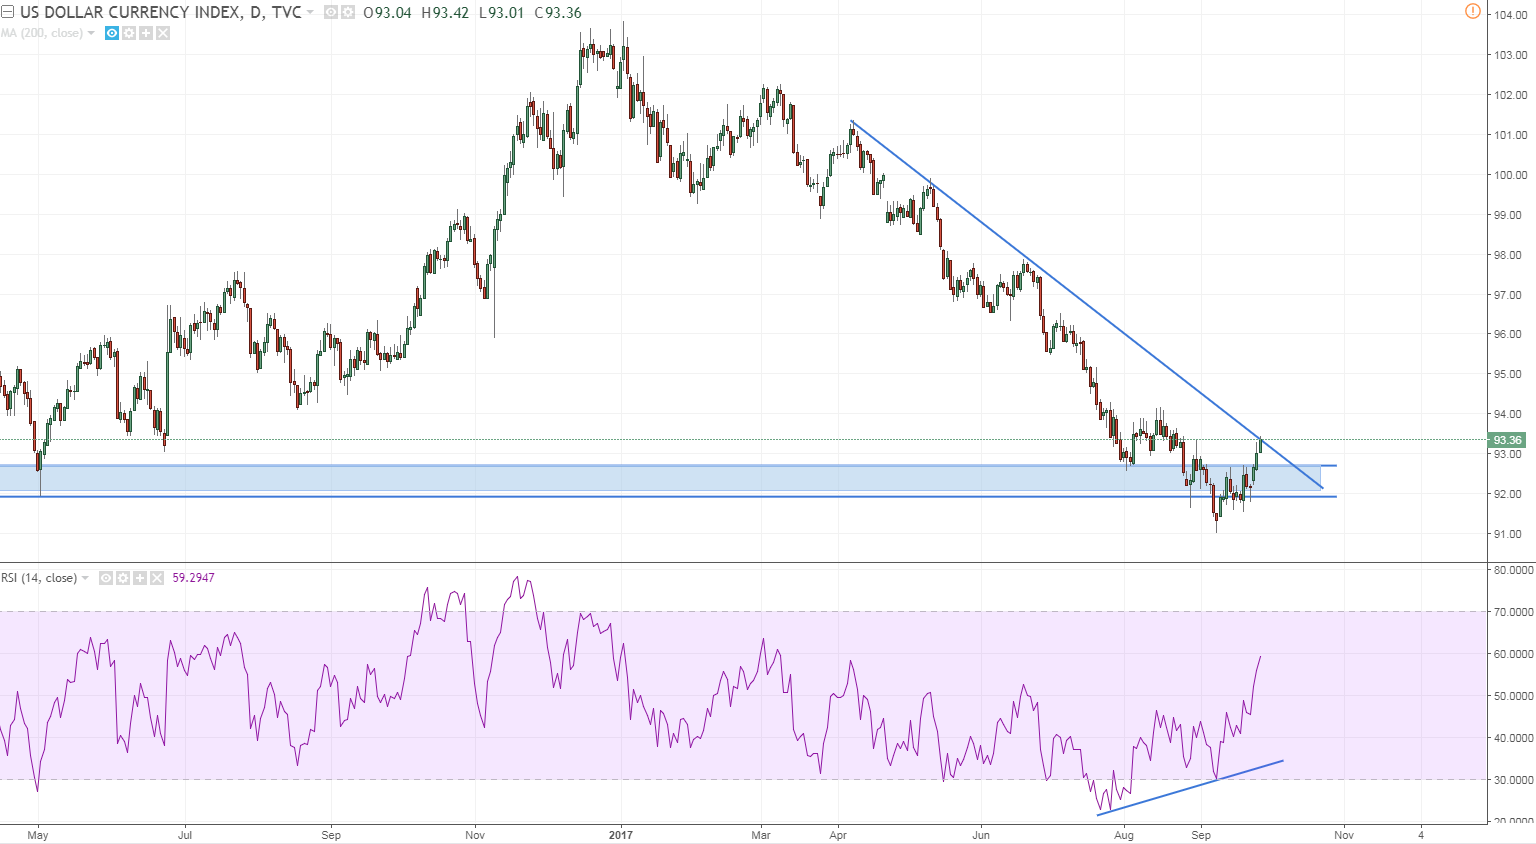 dxy bullish but at resiatnce that has held since march-april.PNG